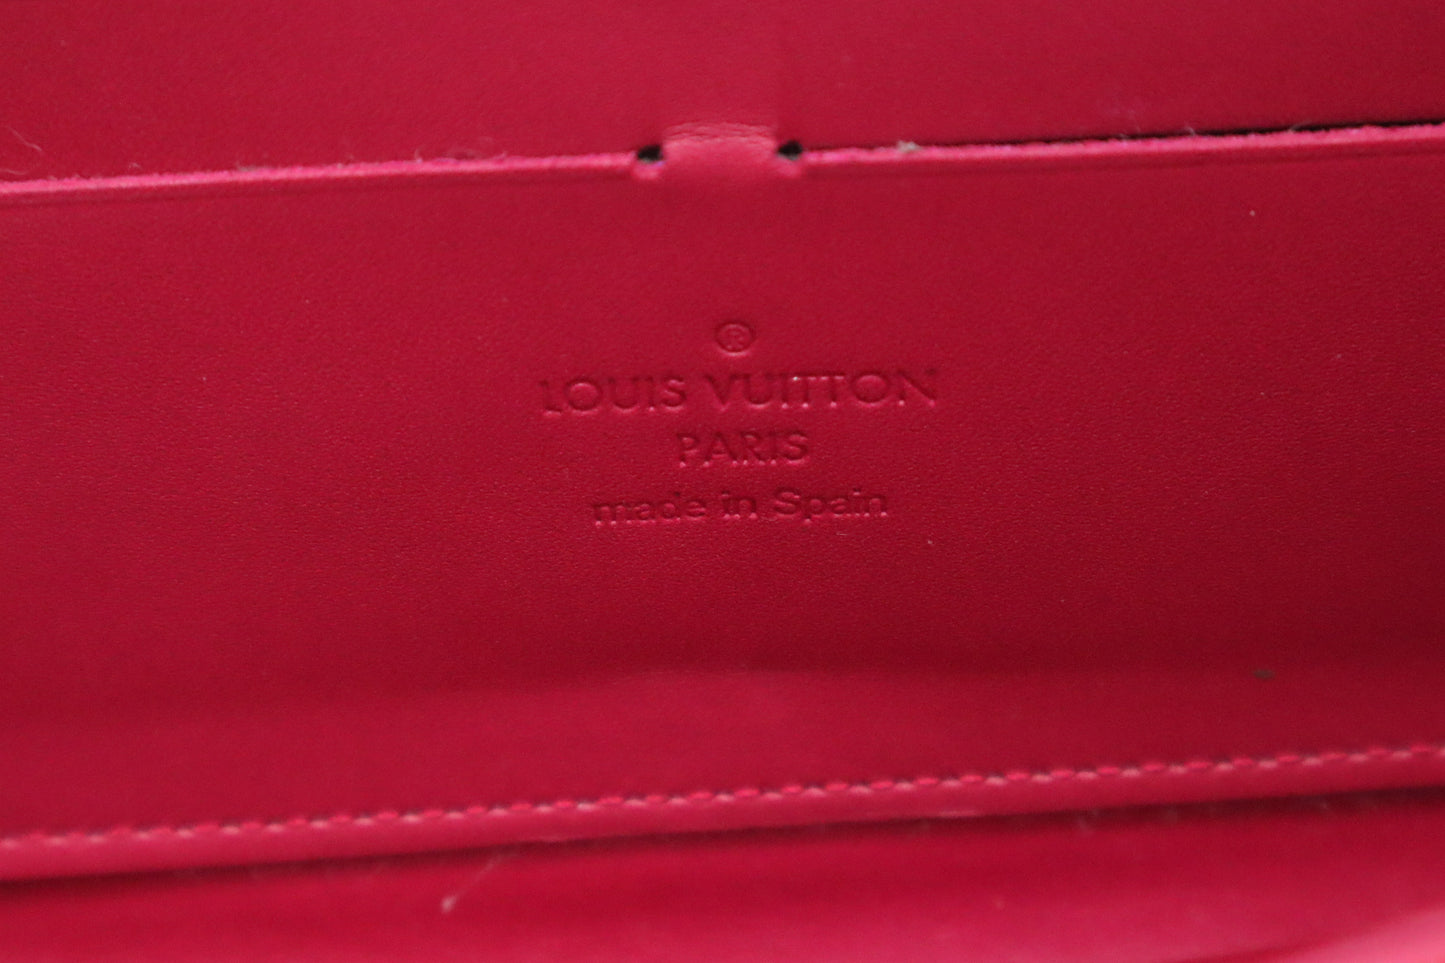 Louis Vuitton Long Zippy Wallet in Indian Rose Vernis Leather